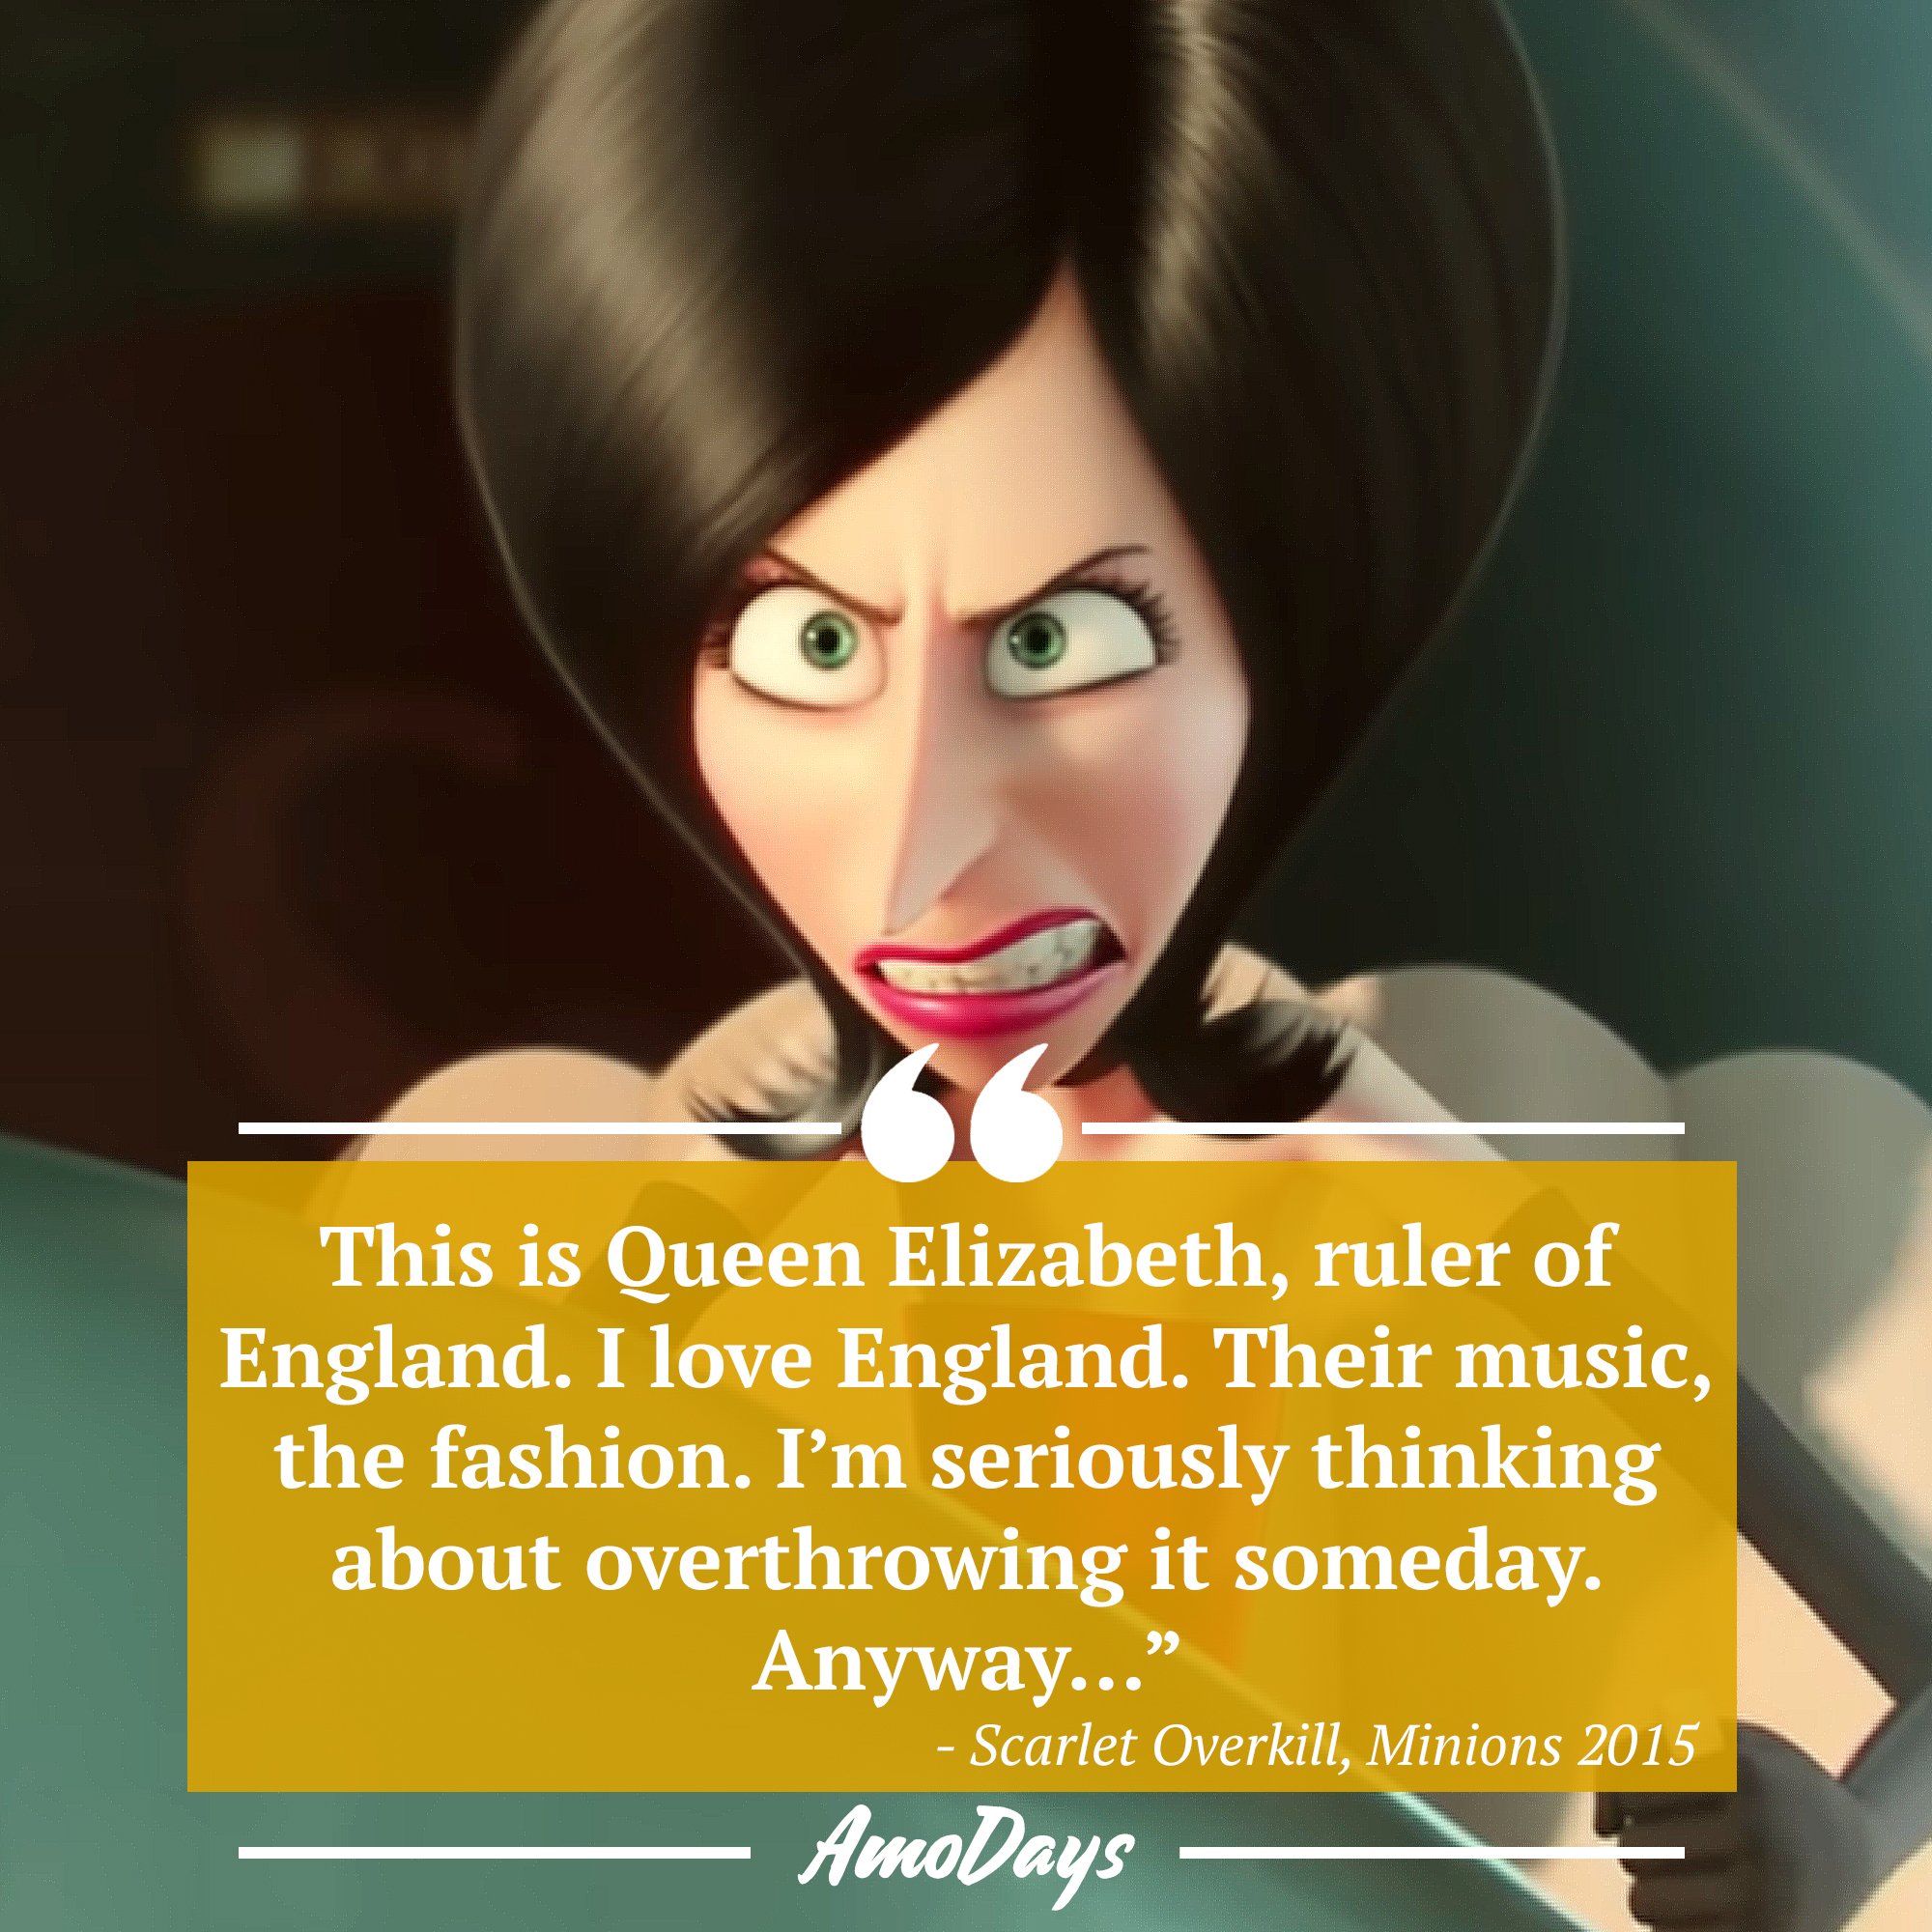 Scarlet Overkill's quote from "Minions" 2015 “This is Queen Elizabeth, ruler of England. I love England. Their music, the fashion. I’m seriously thinking about overthrowing it someday. Anyway…” | Image: AmoDays